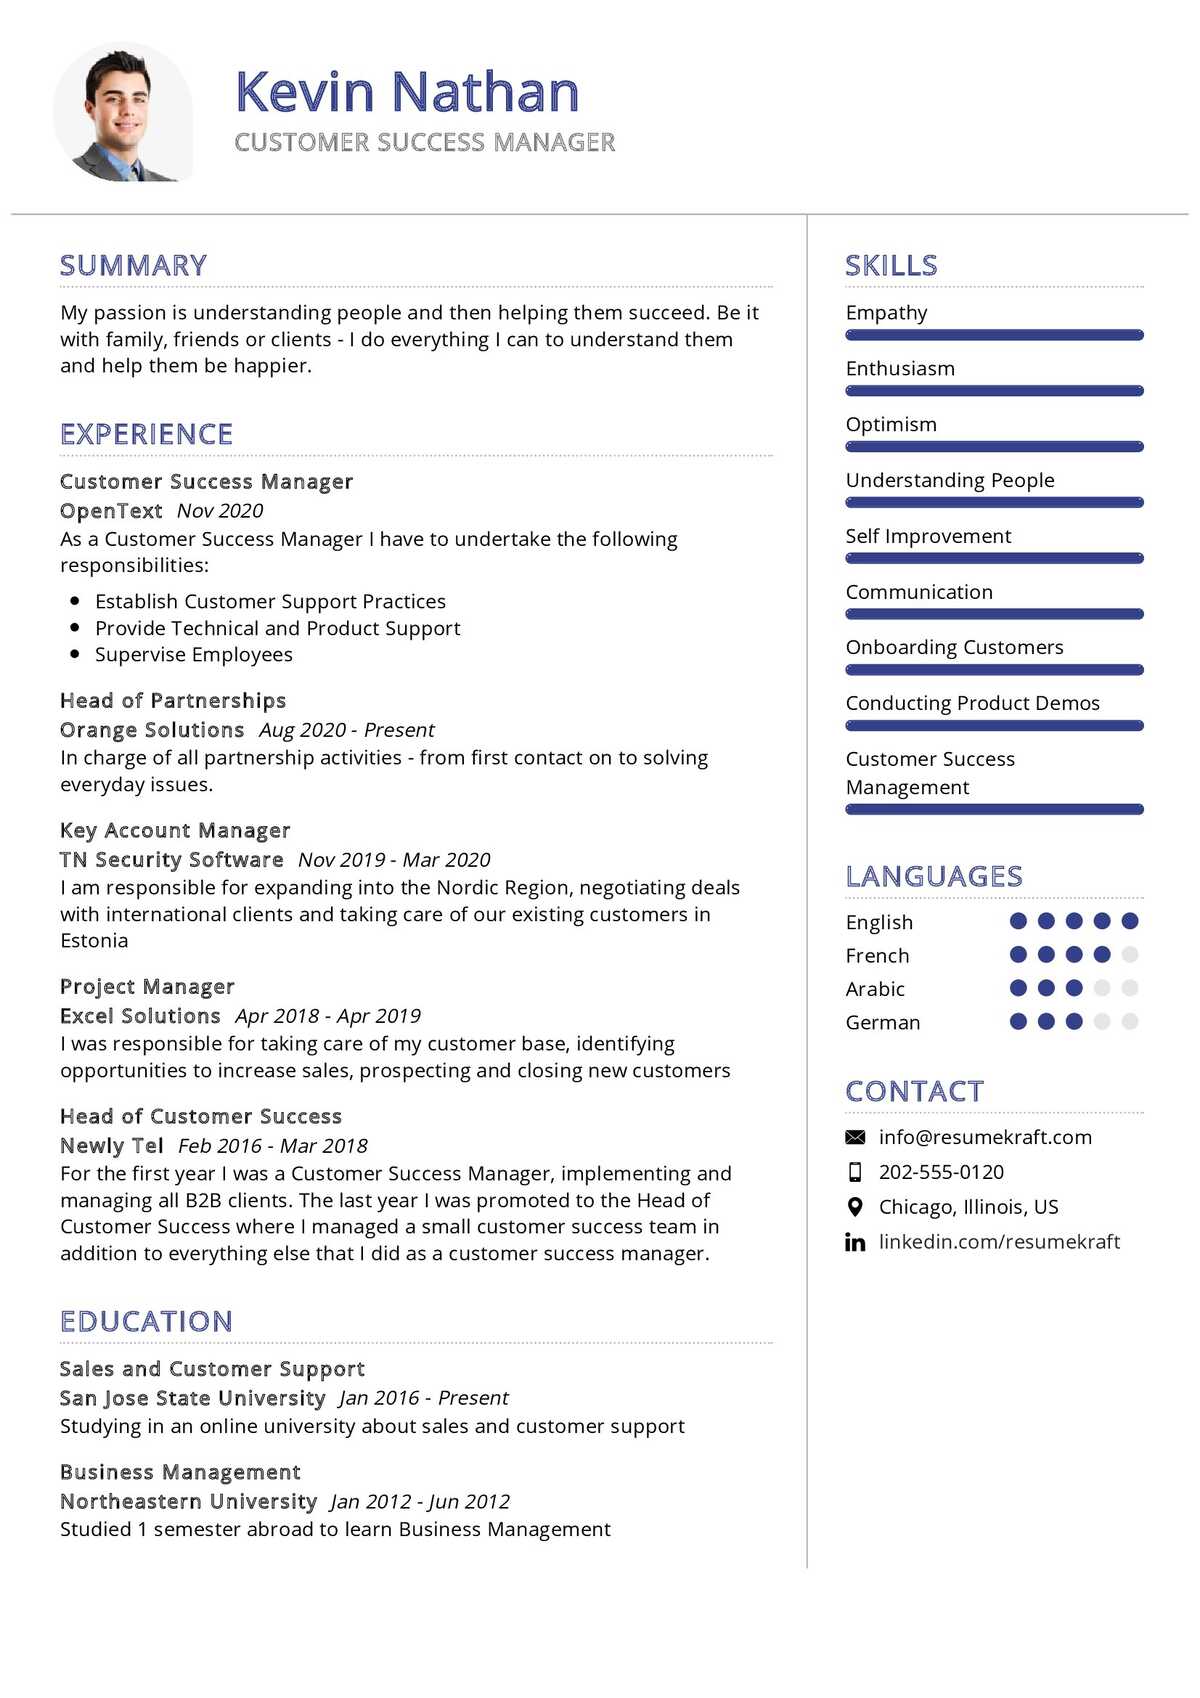 Customer Success Manager Resume Sample 20   Writing Guide ...